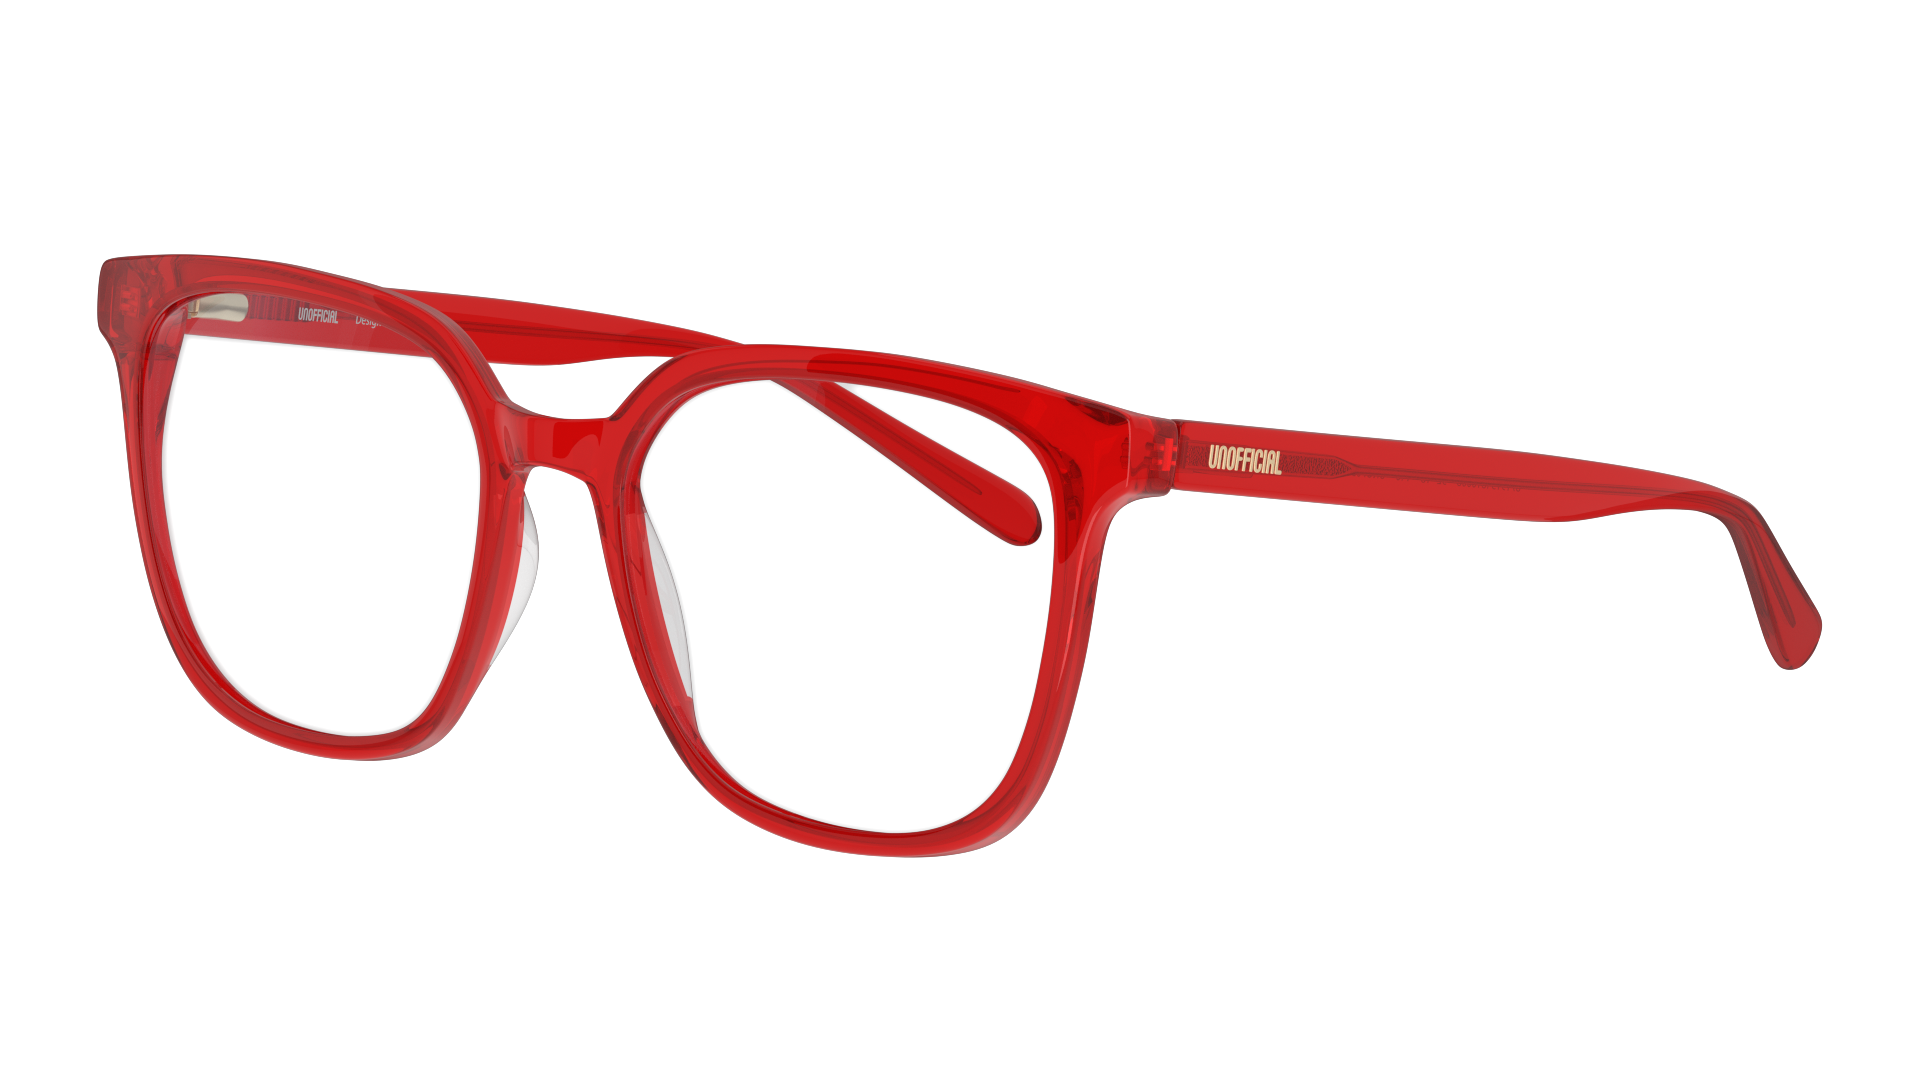 Angle_Left01 Unofficial UNOF0314 (RR00) Glasses Transparent / Red